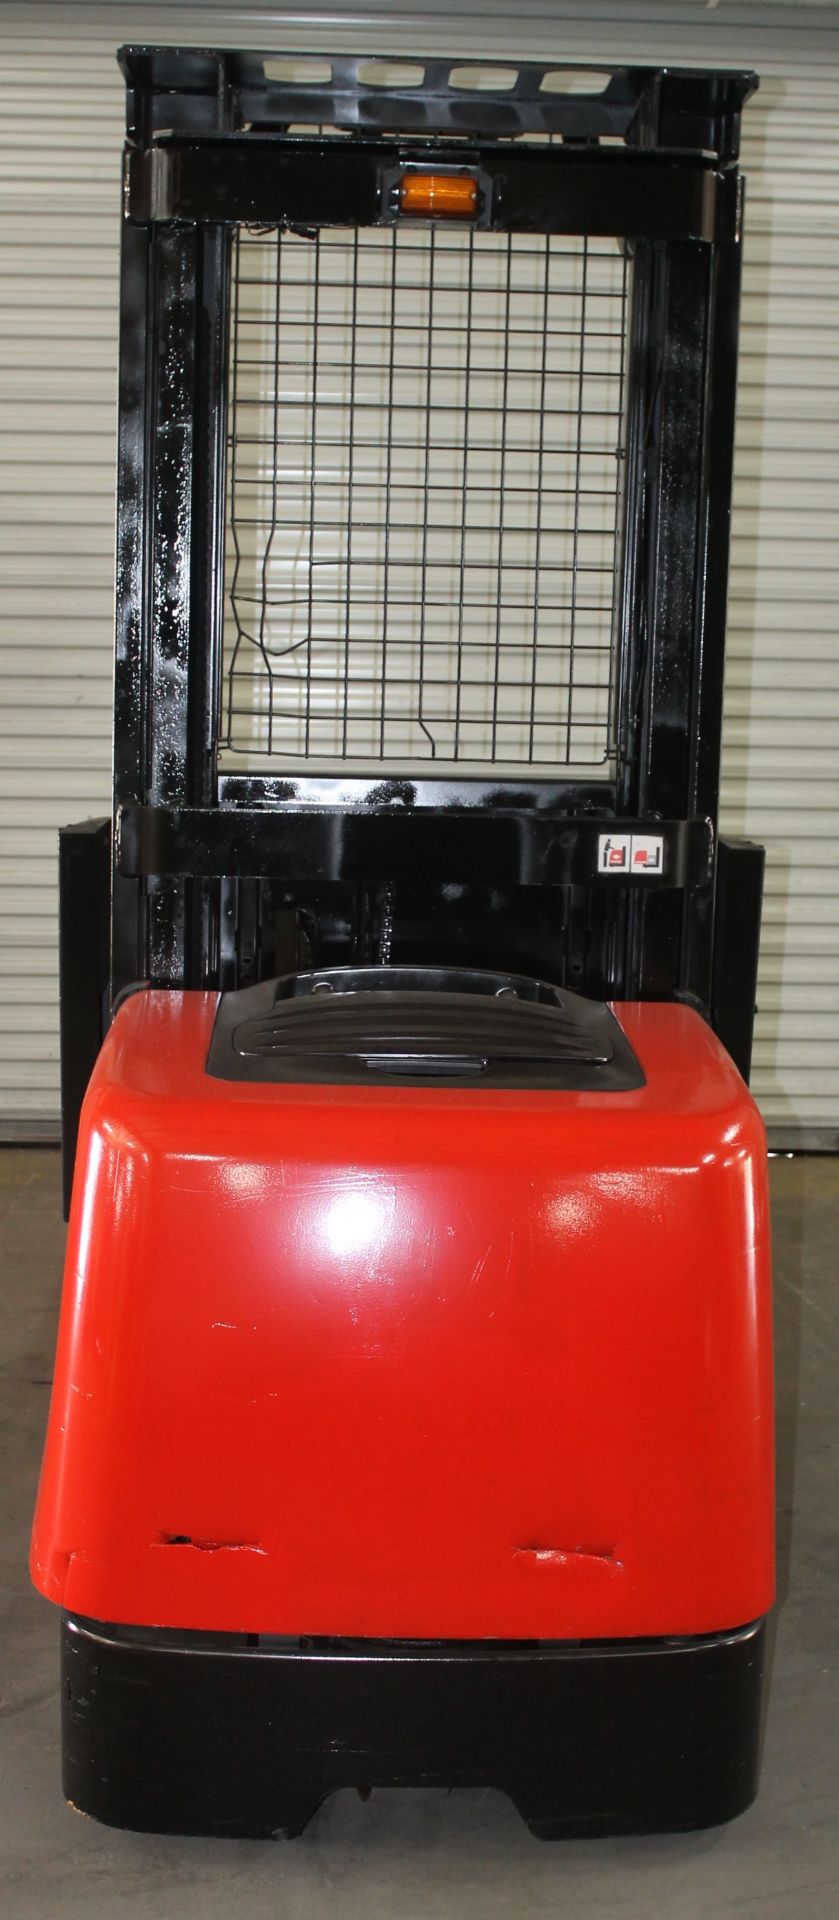 2003 RAYMOND ORDER PICKER WITH ERGO LIFT / MINI MAST FEATURE, CLICK HERE TO WATCH VIDEO - Image 6 of 8